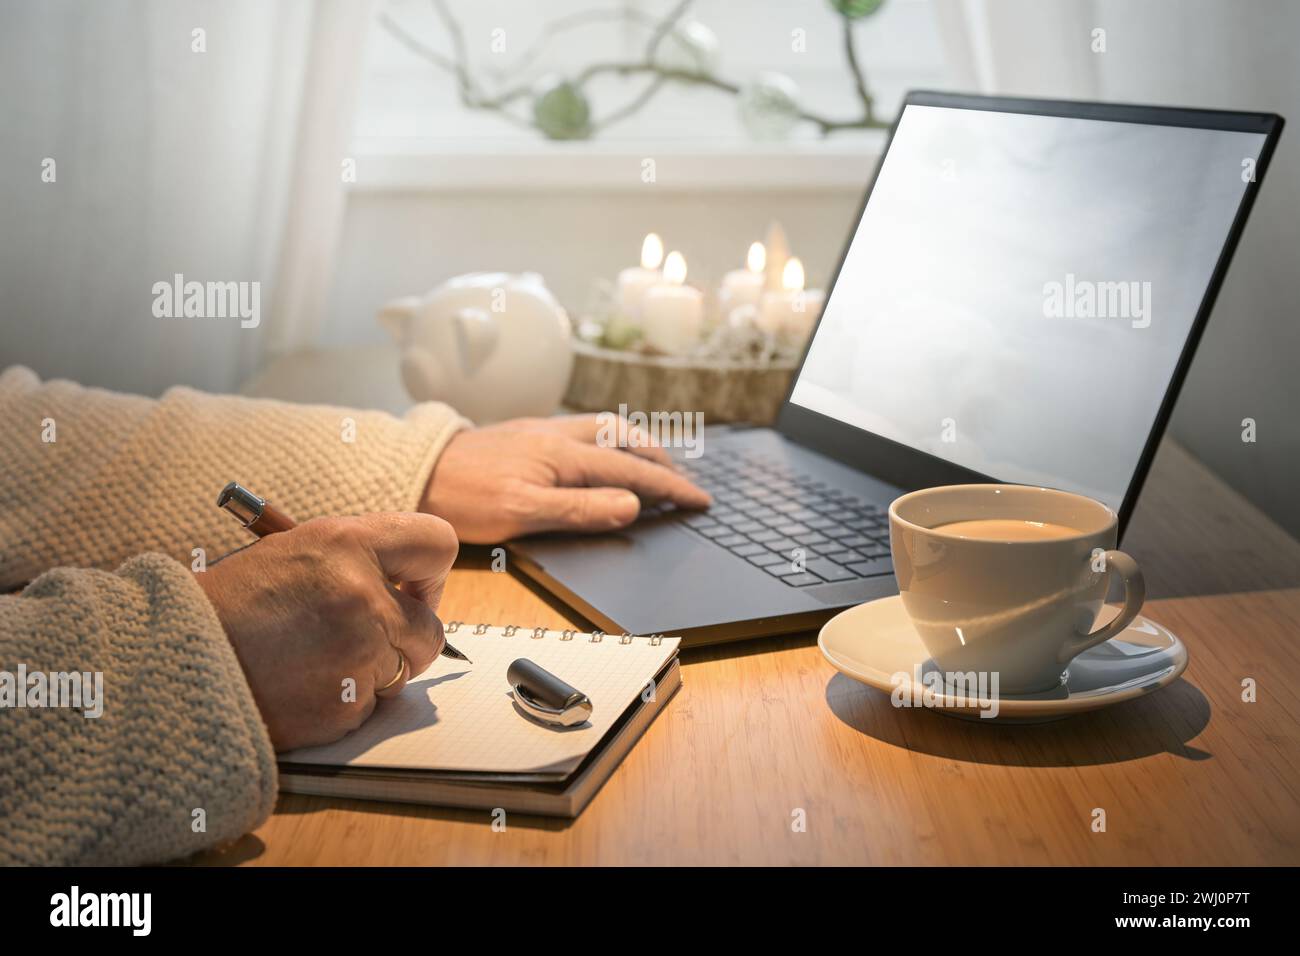 Hands of an older woman using laptop on a budget online shopping for Christmas presents and making notes on a table with advent Stock Photo